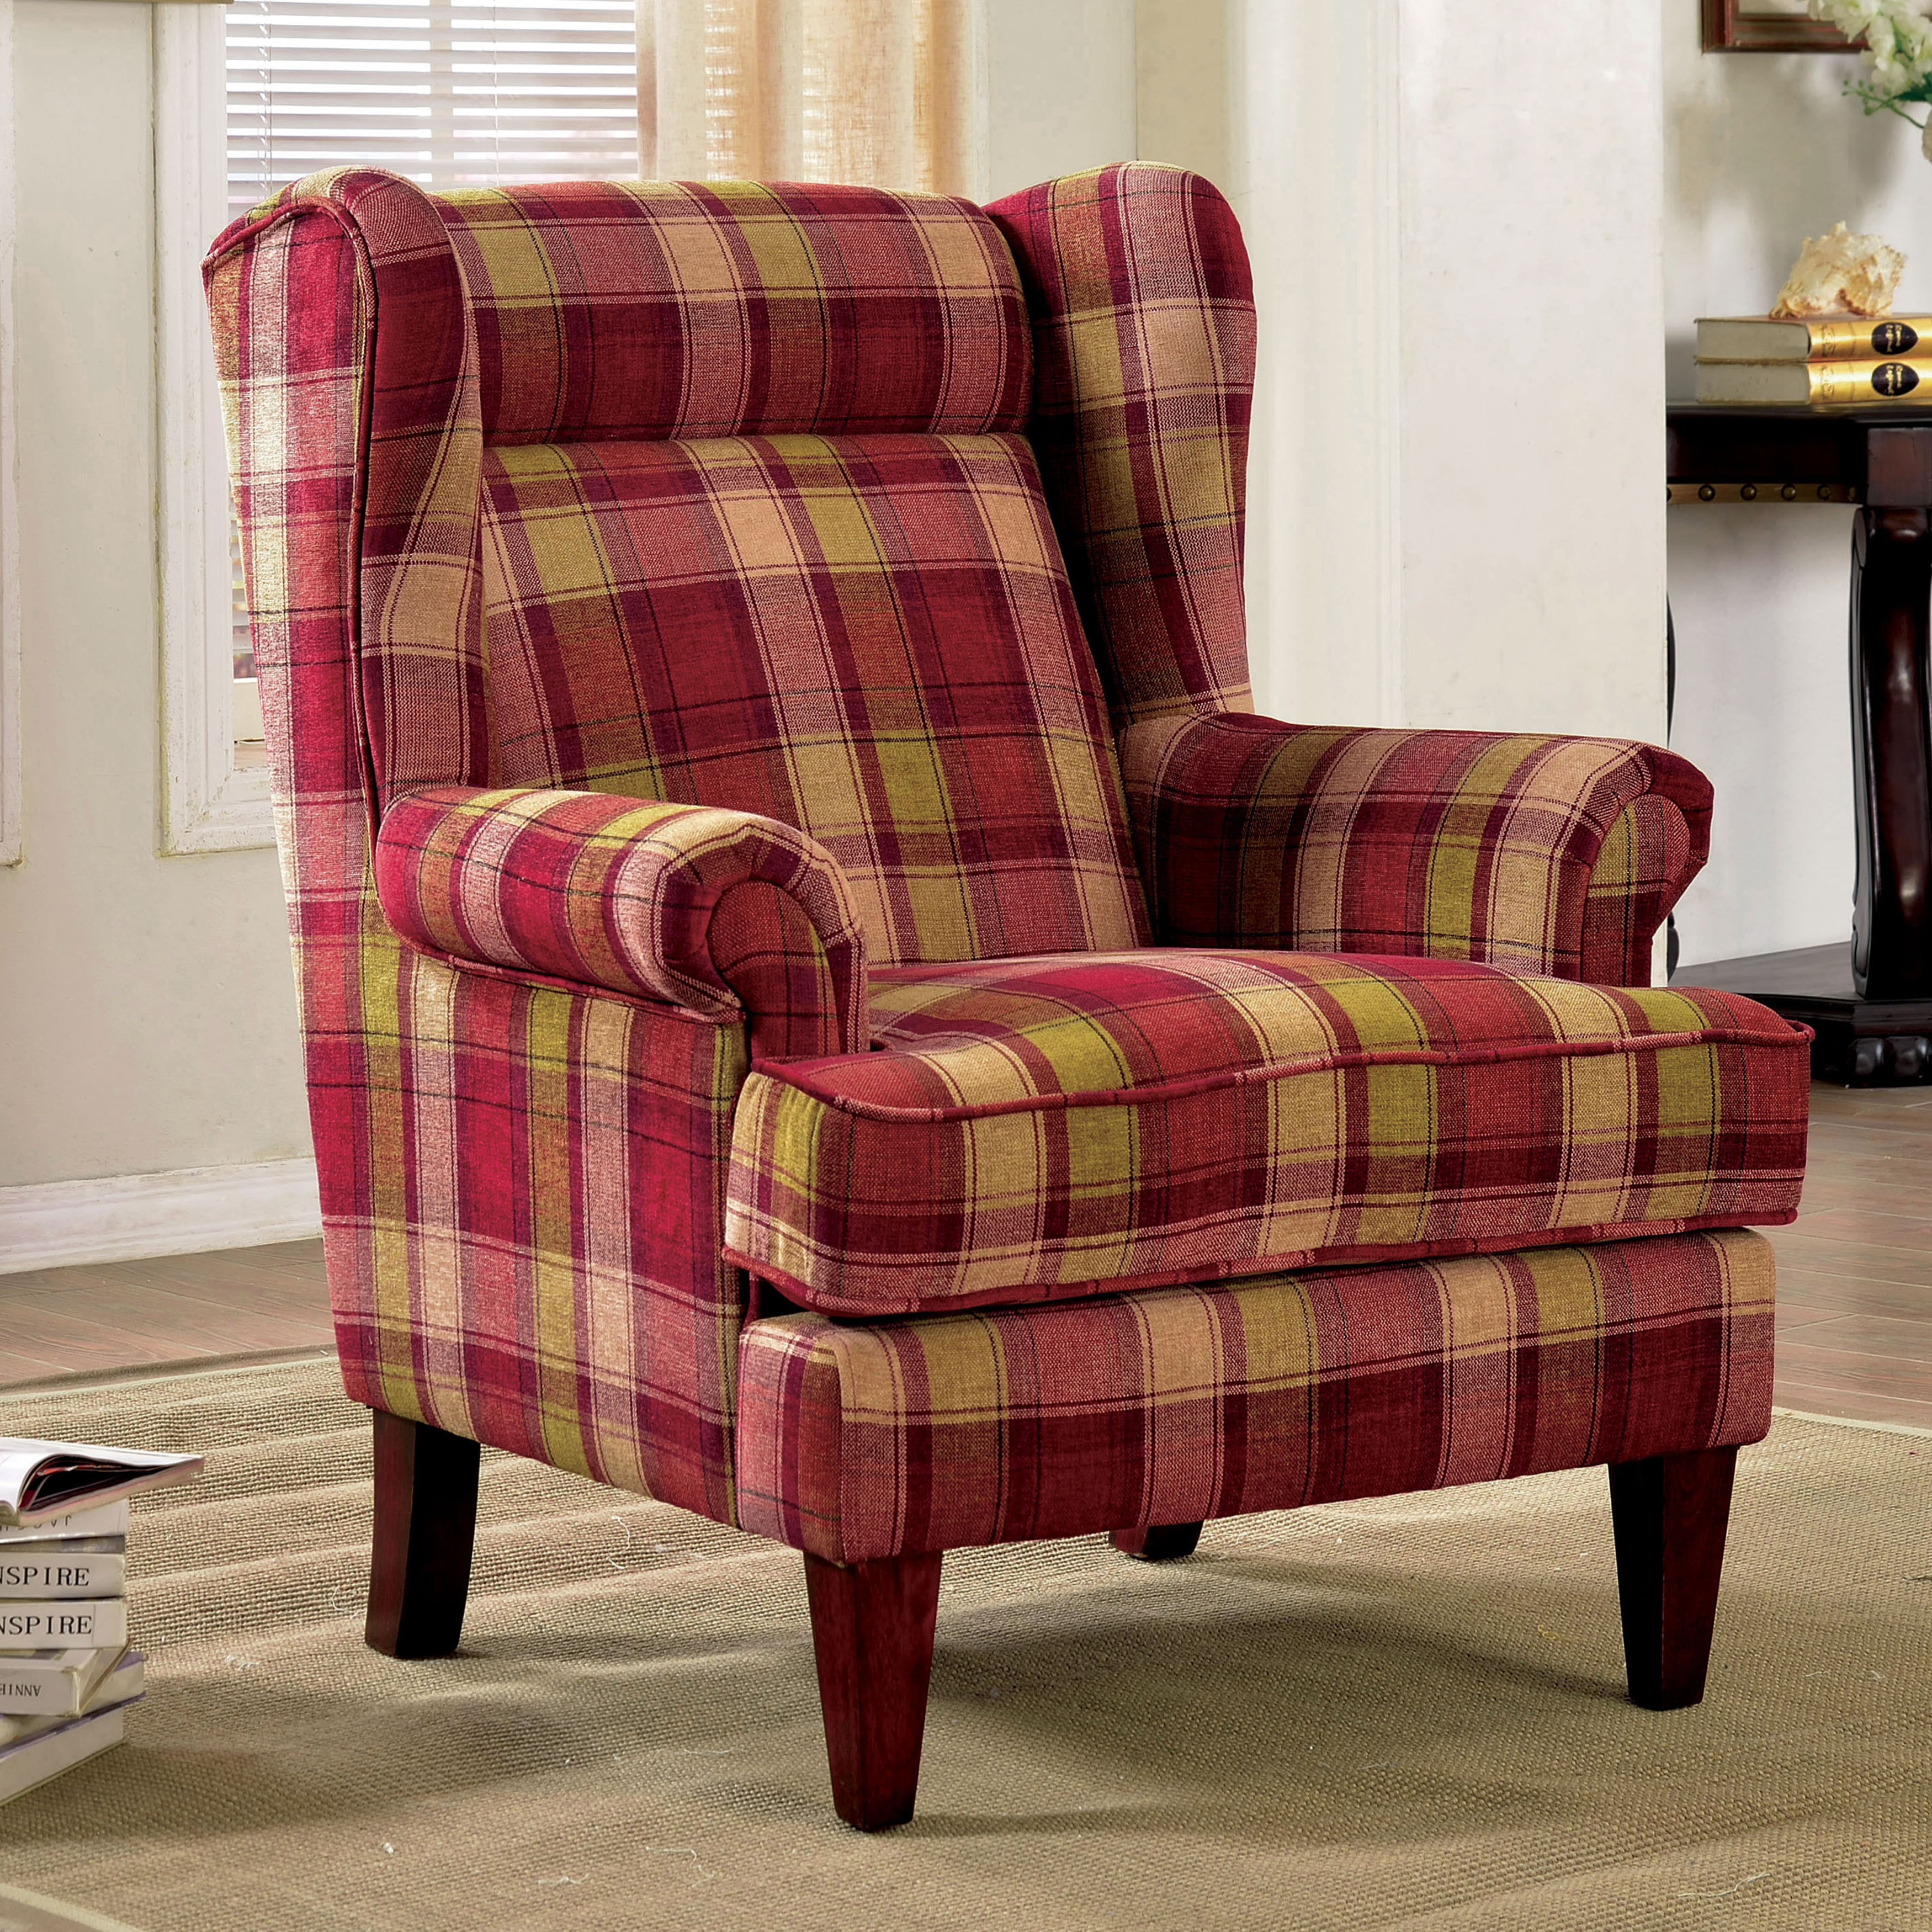 Shop Furniture Of America Shermin Traditional Plaid Patterned